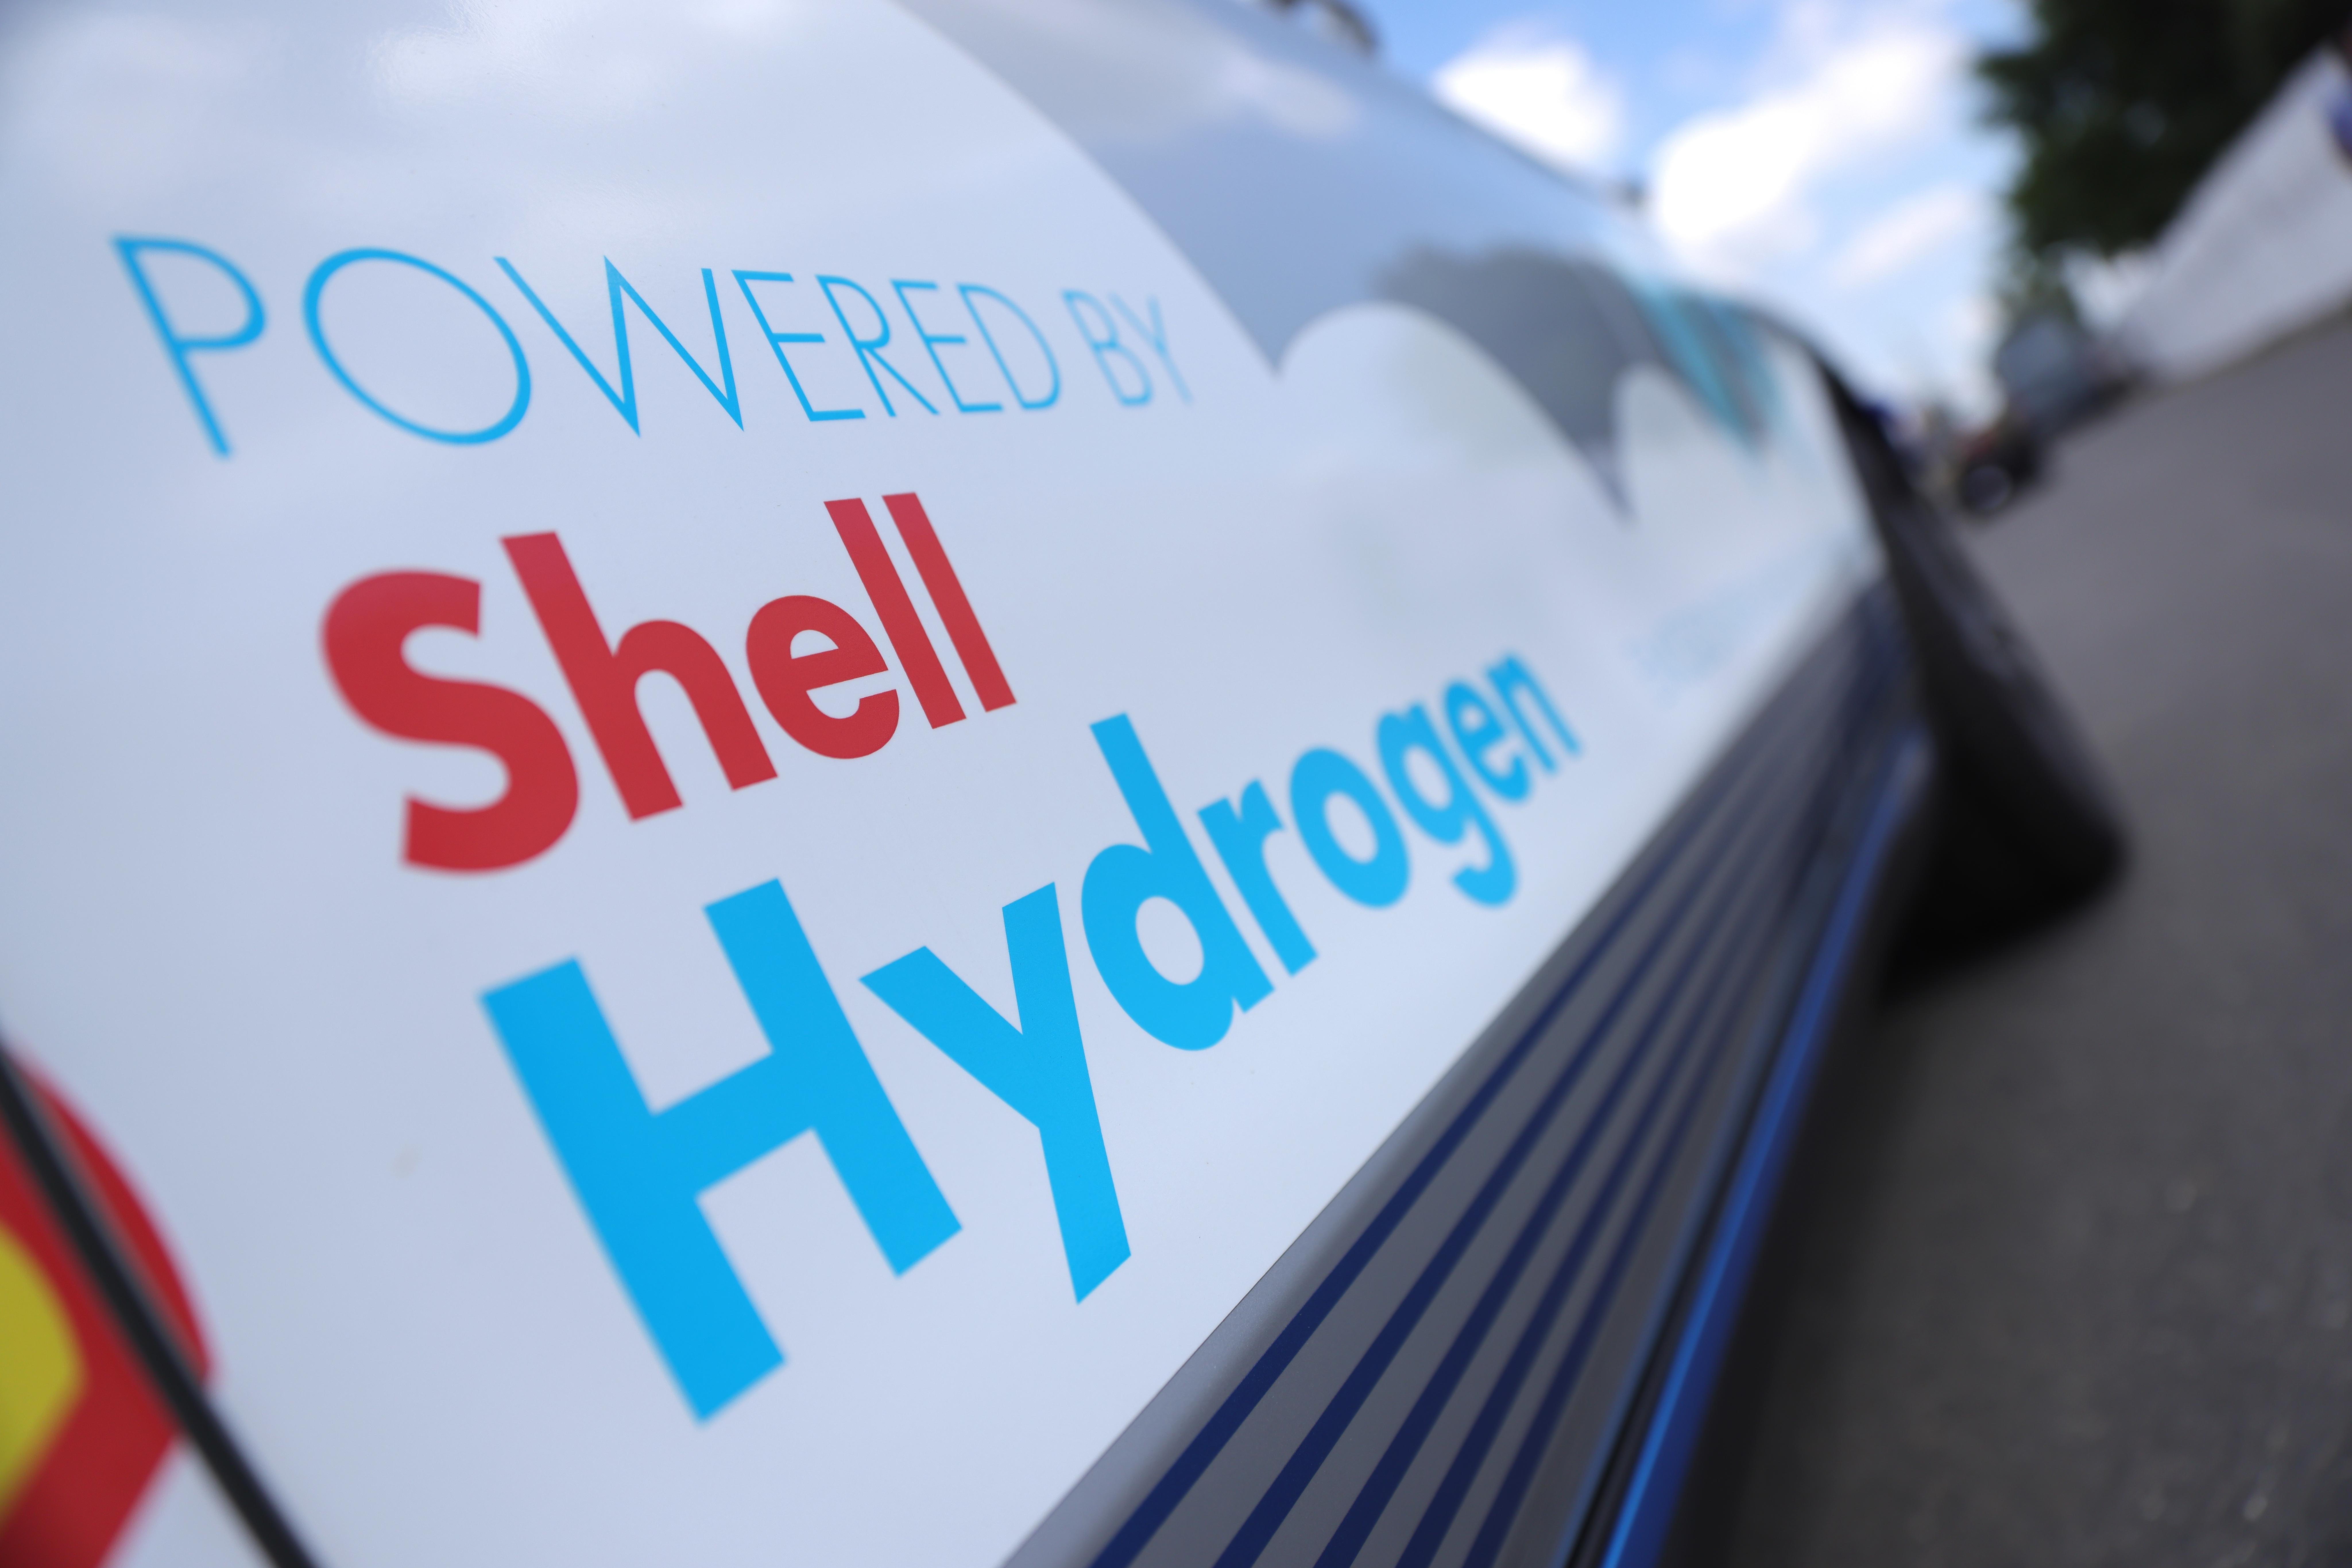 The side of a truck reads "Powered by Shell Hydrogen," with the Shell logo.